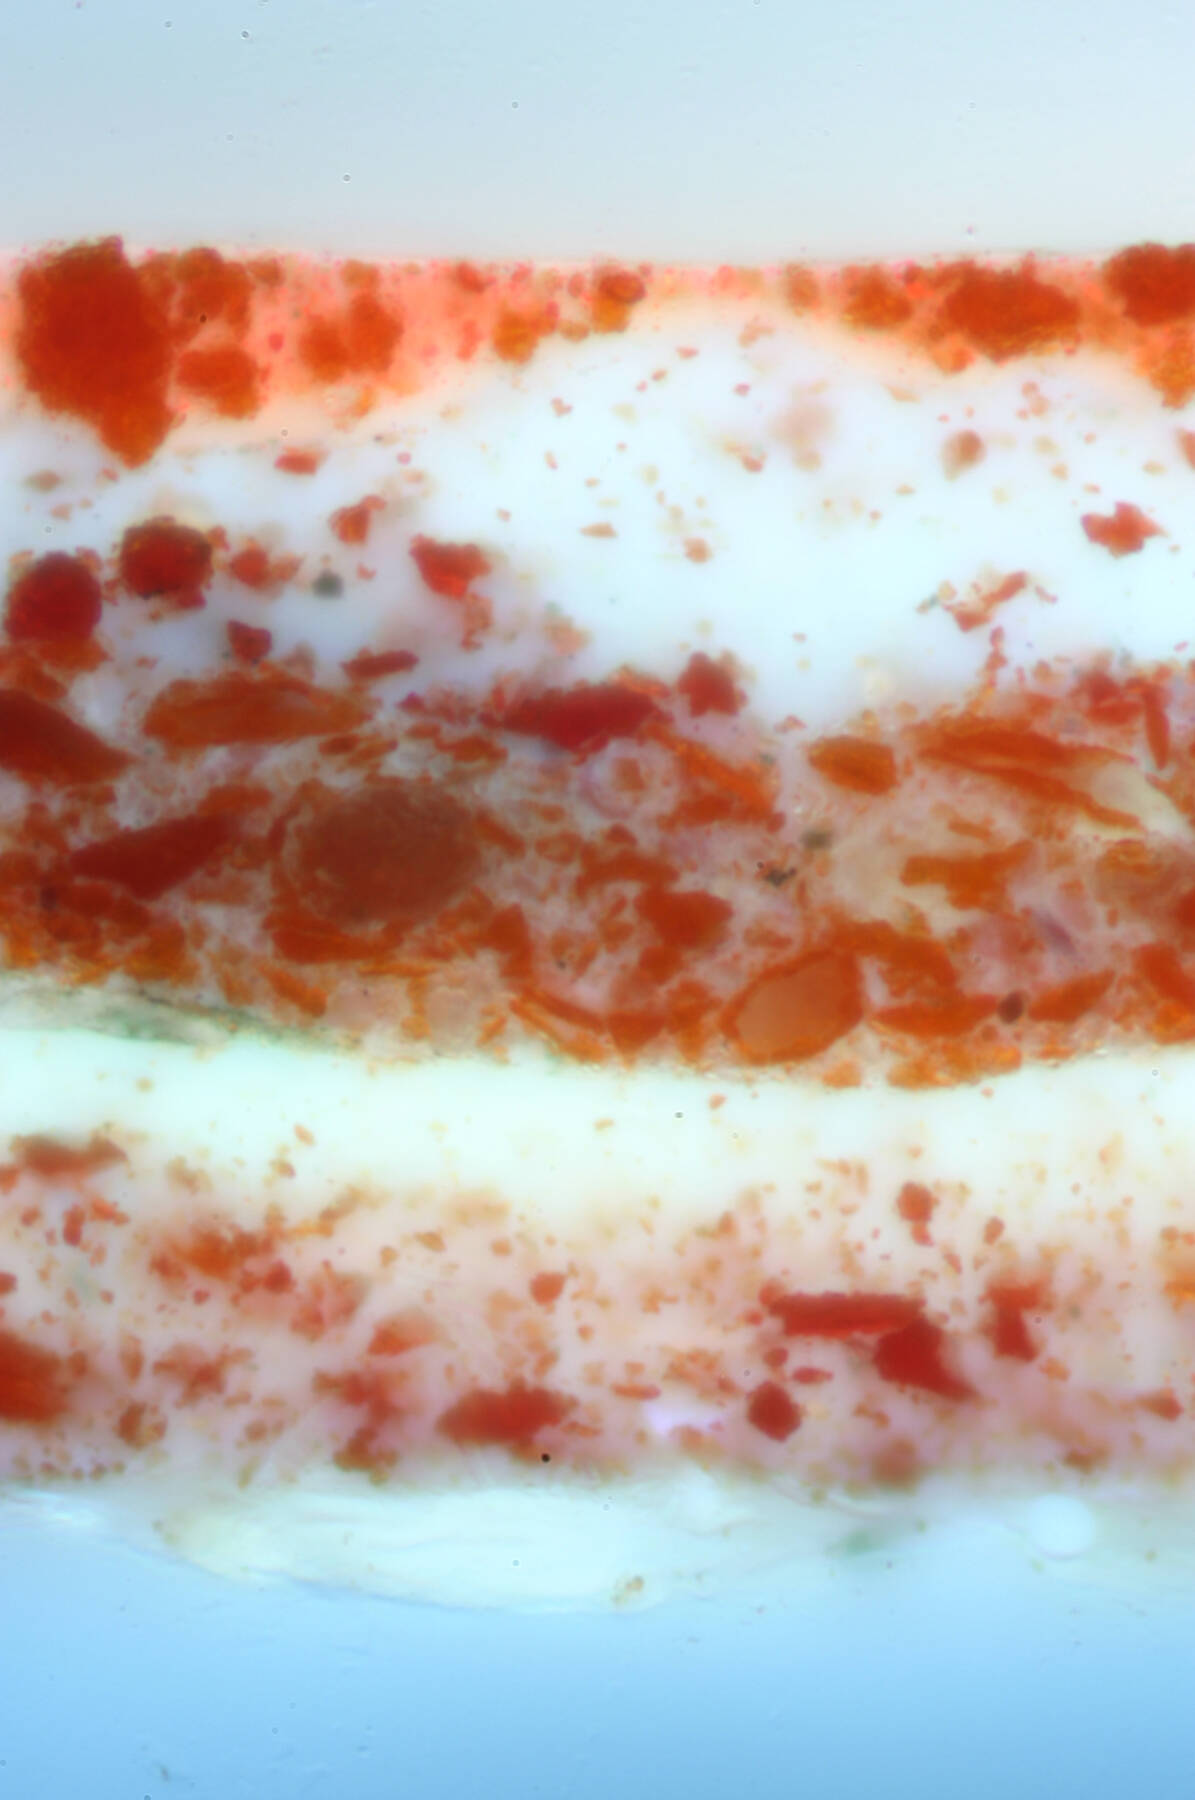 cross-section photomicrograph revealing the multi-layer structure of the European lacquer under UV light, with strips of white, reddish orange, and light blue